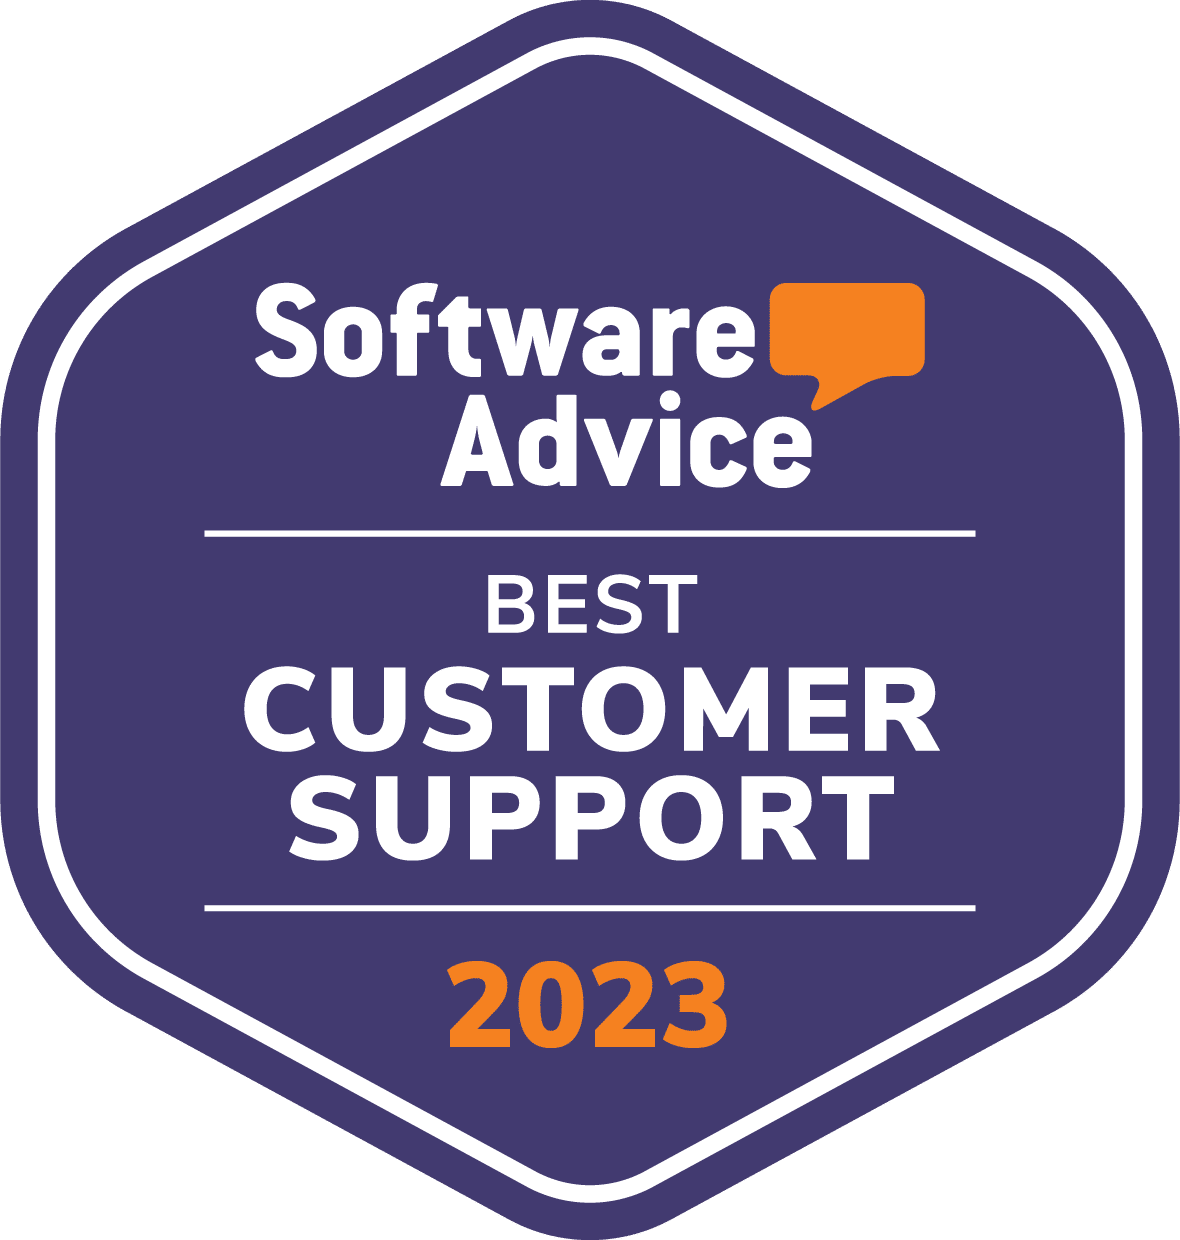 MyCase is awarded Best Customer Support by Software Advice in 2023